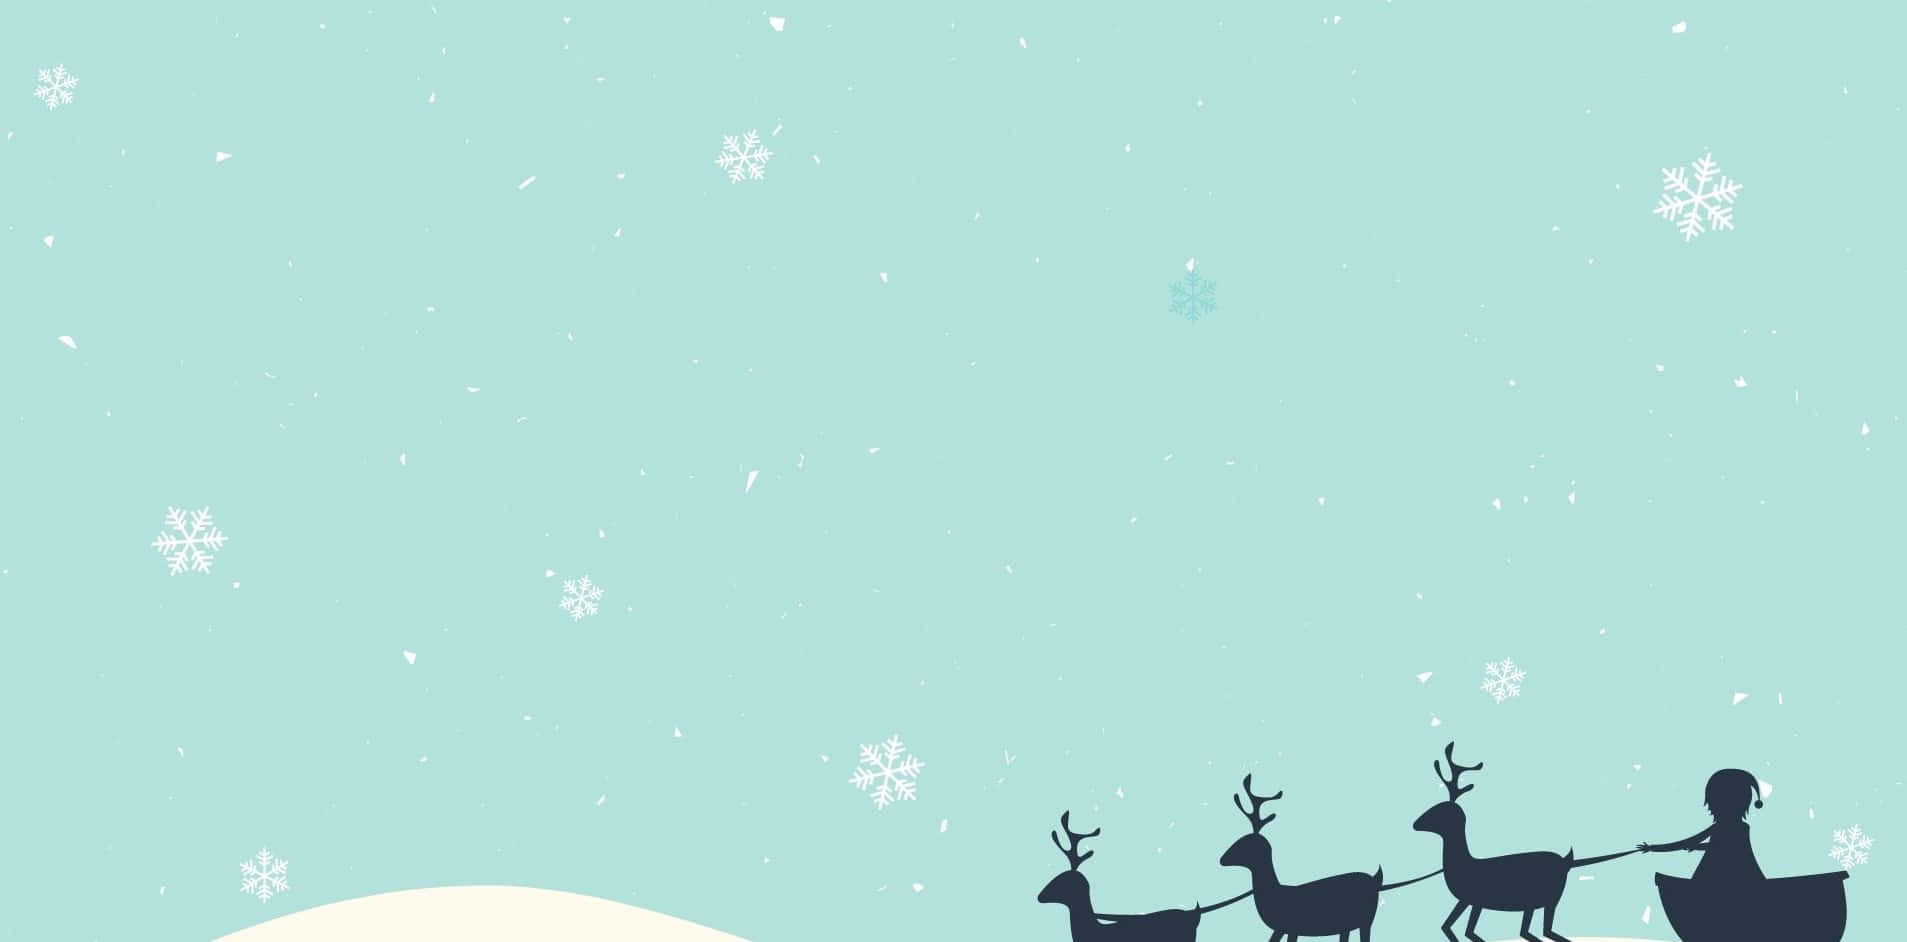 Cute Winter Silhouettes Reindeer Background